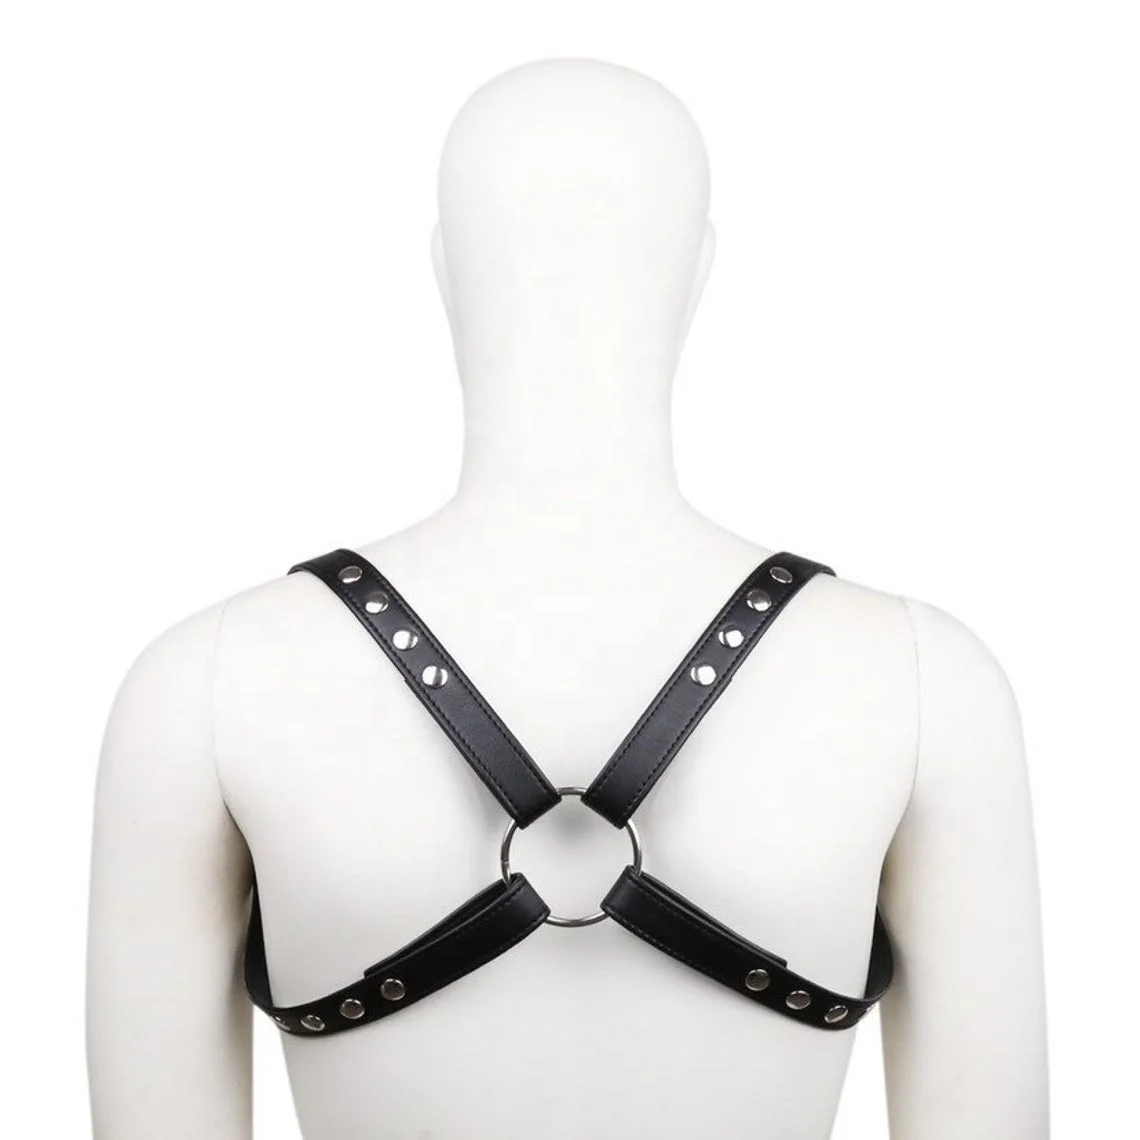 Faux Leather Body Harness with Adjustable Straps, 1,000+ Men's Lingerie